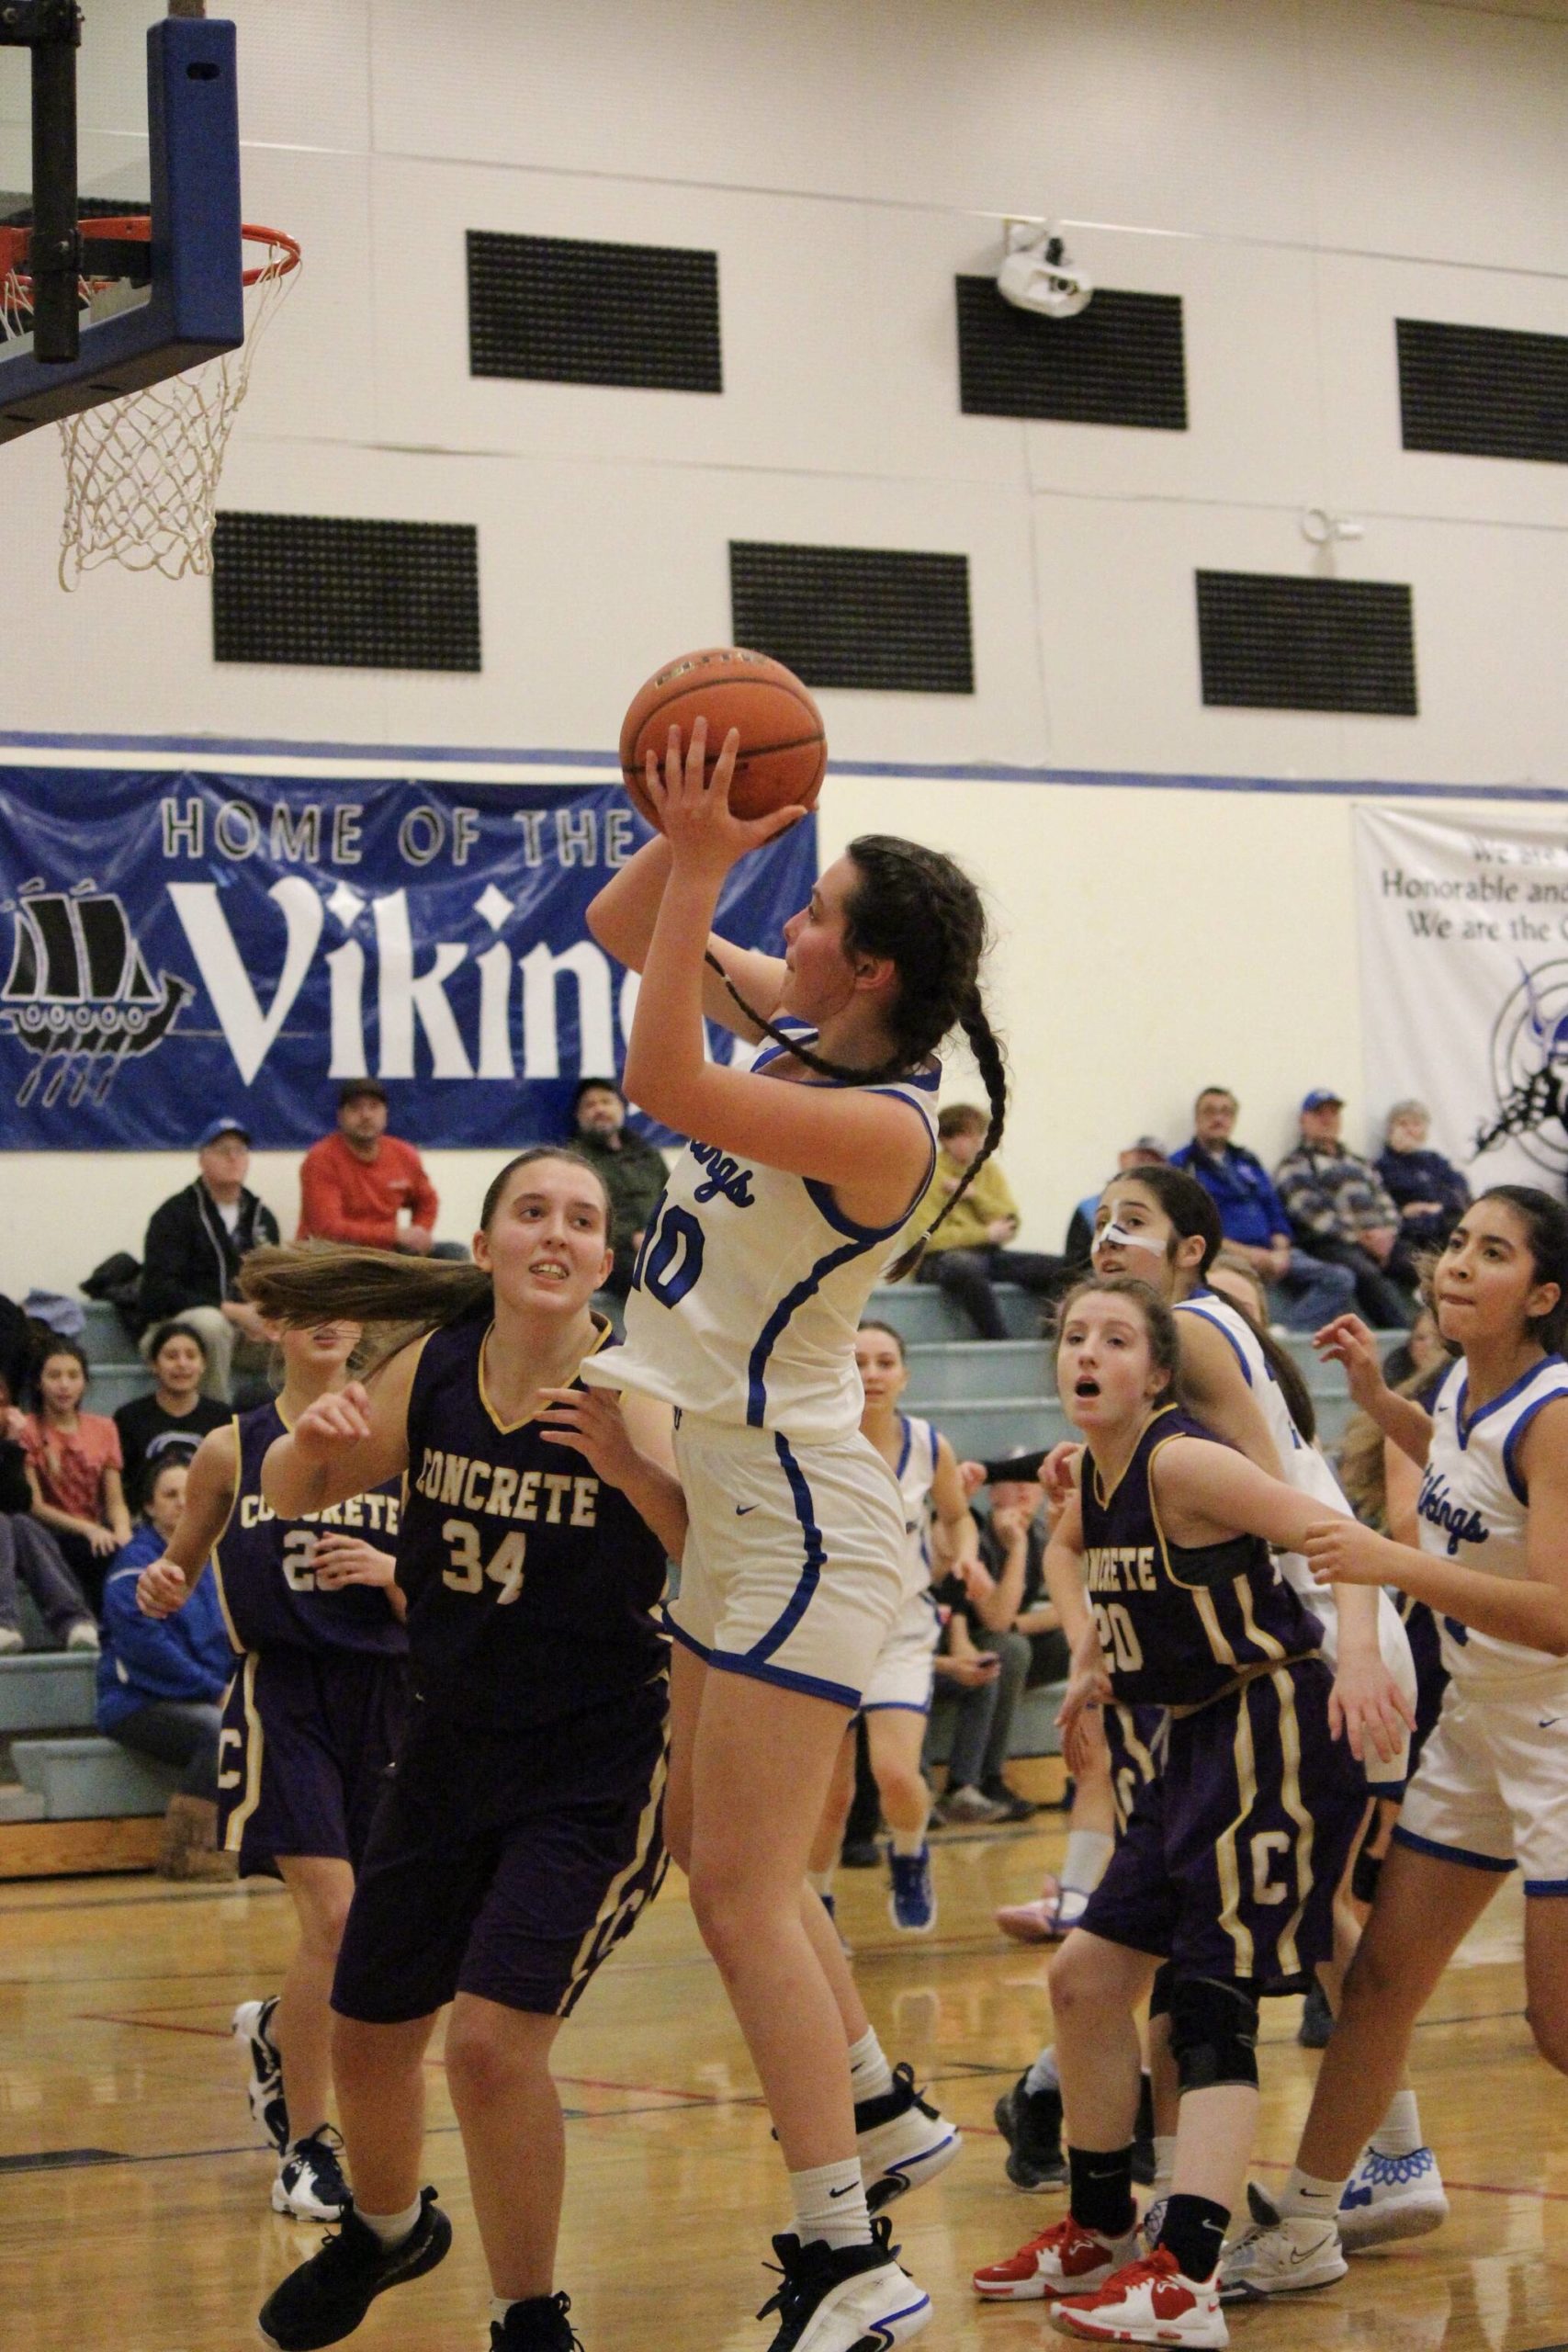 Corey Wiscomb photo.
Junior Sera Knapp hauls an offensive rebound before putting the ball back up and in for two.